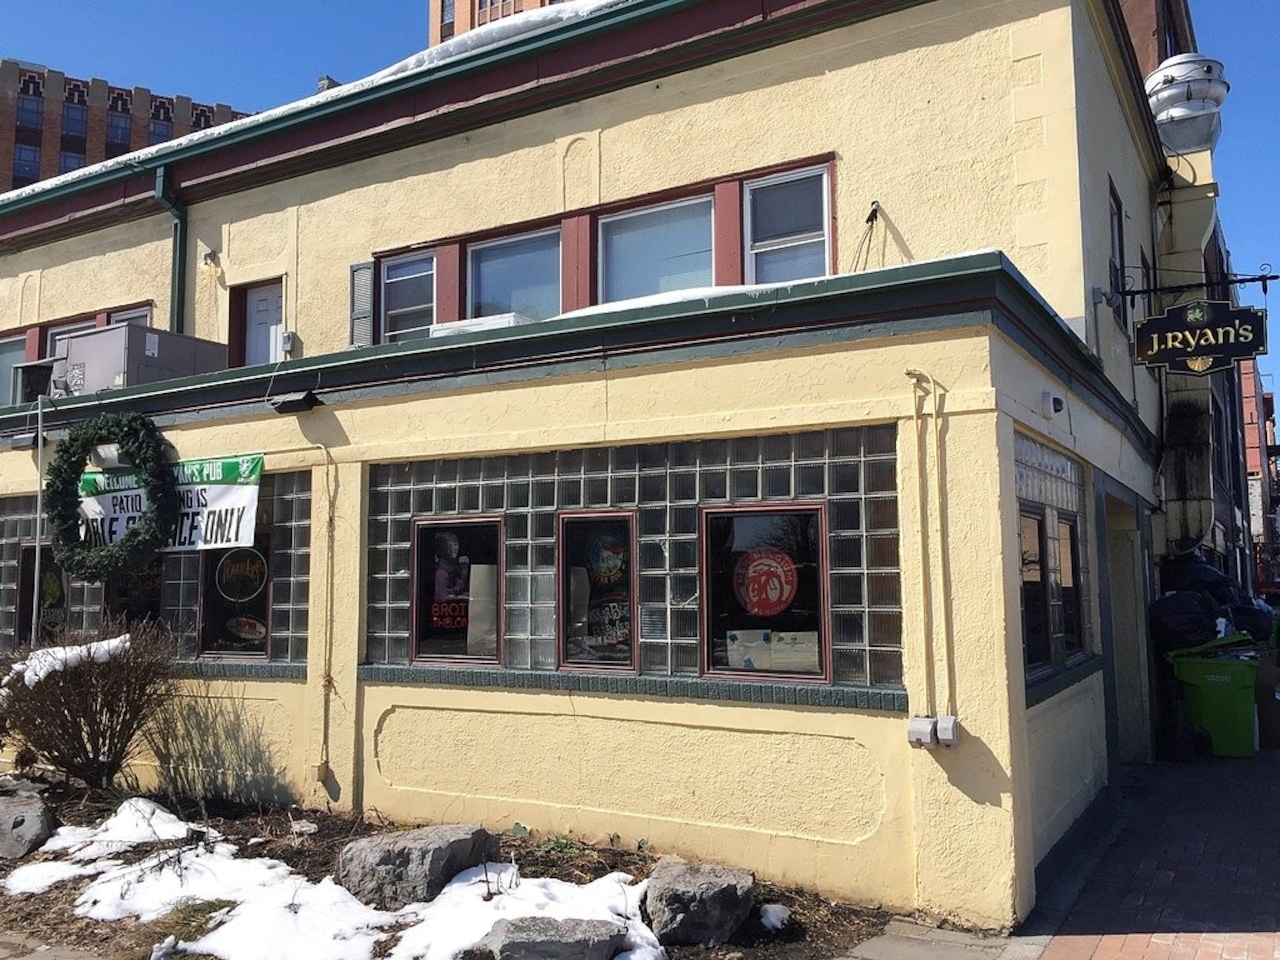 J. Ryan’s Pub, one of Syracuse’s top craft beer bars, to close [Video]